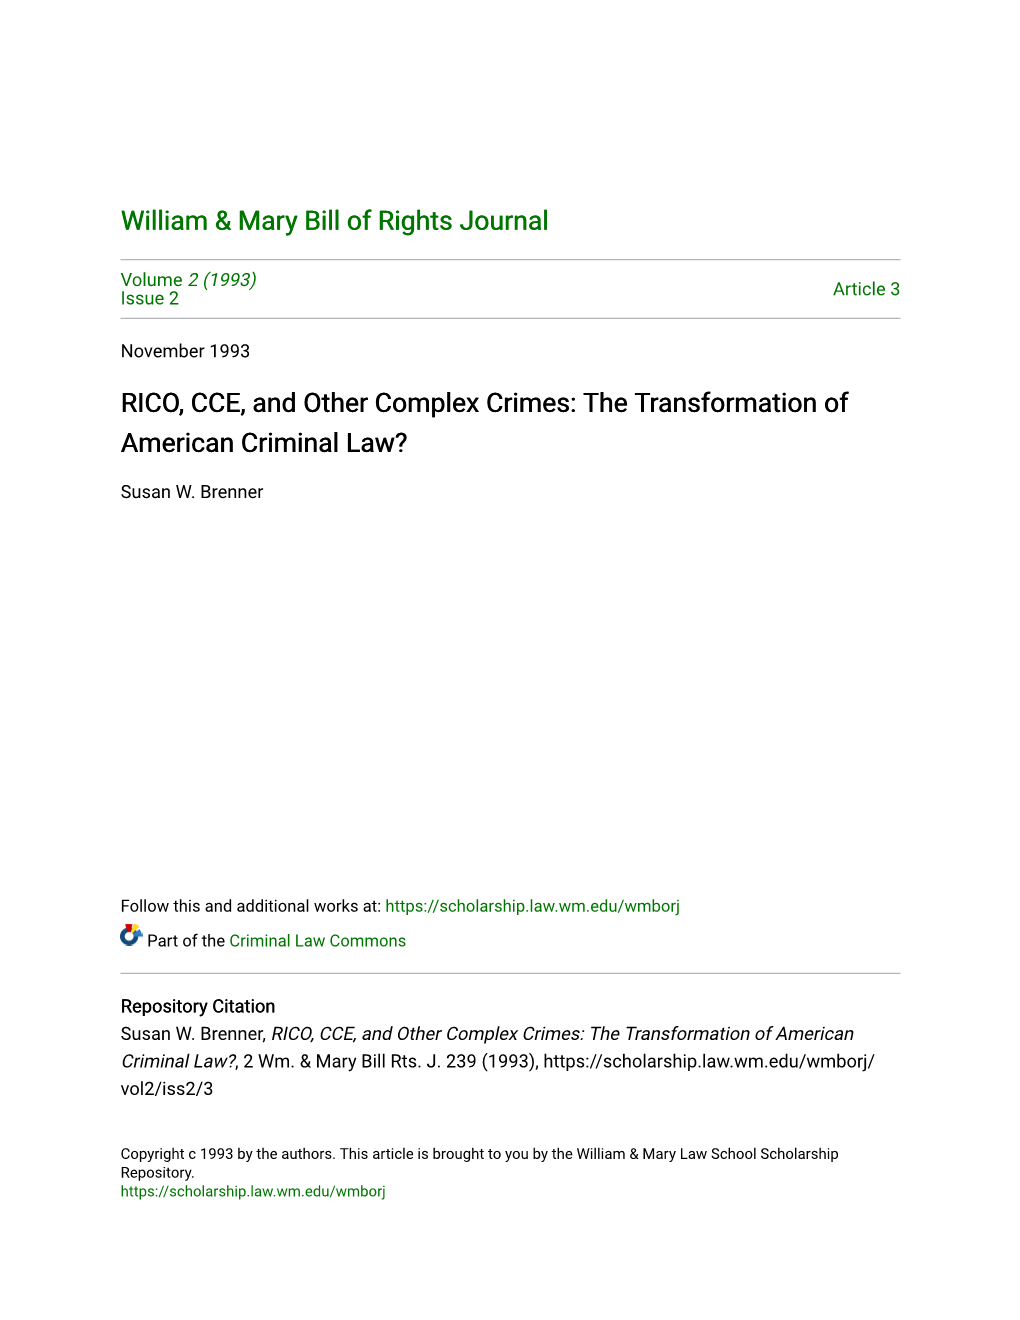 RICO, CCE, and Other Complex Crimes: the Transformation of American Criminal Law?